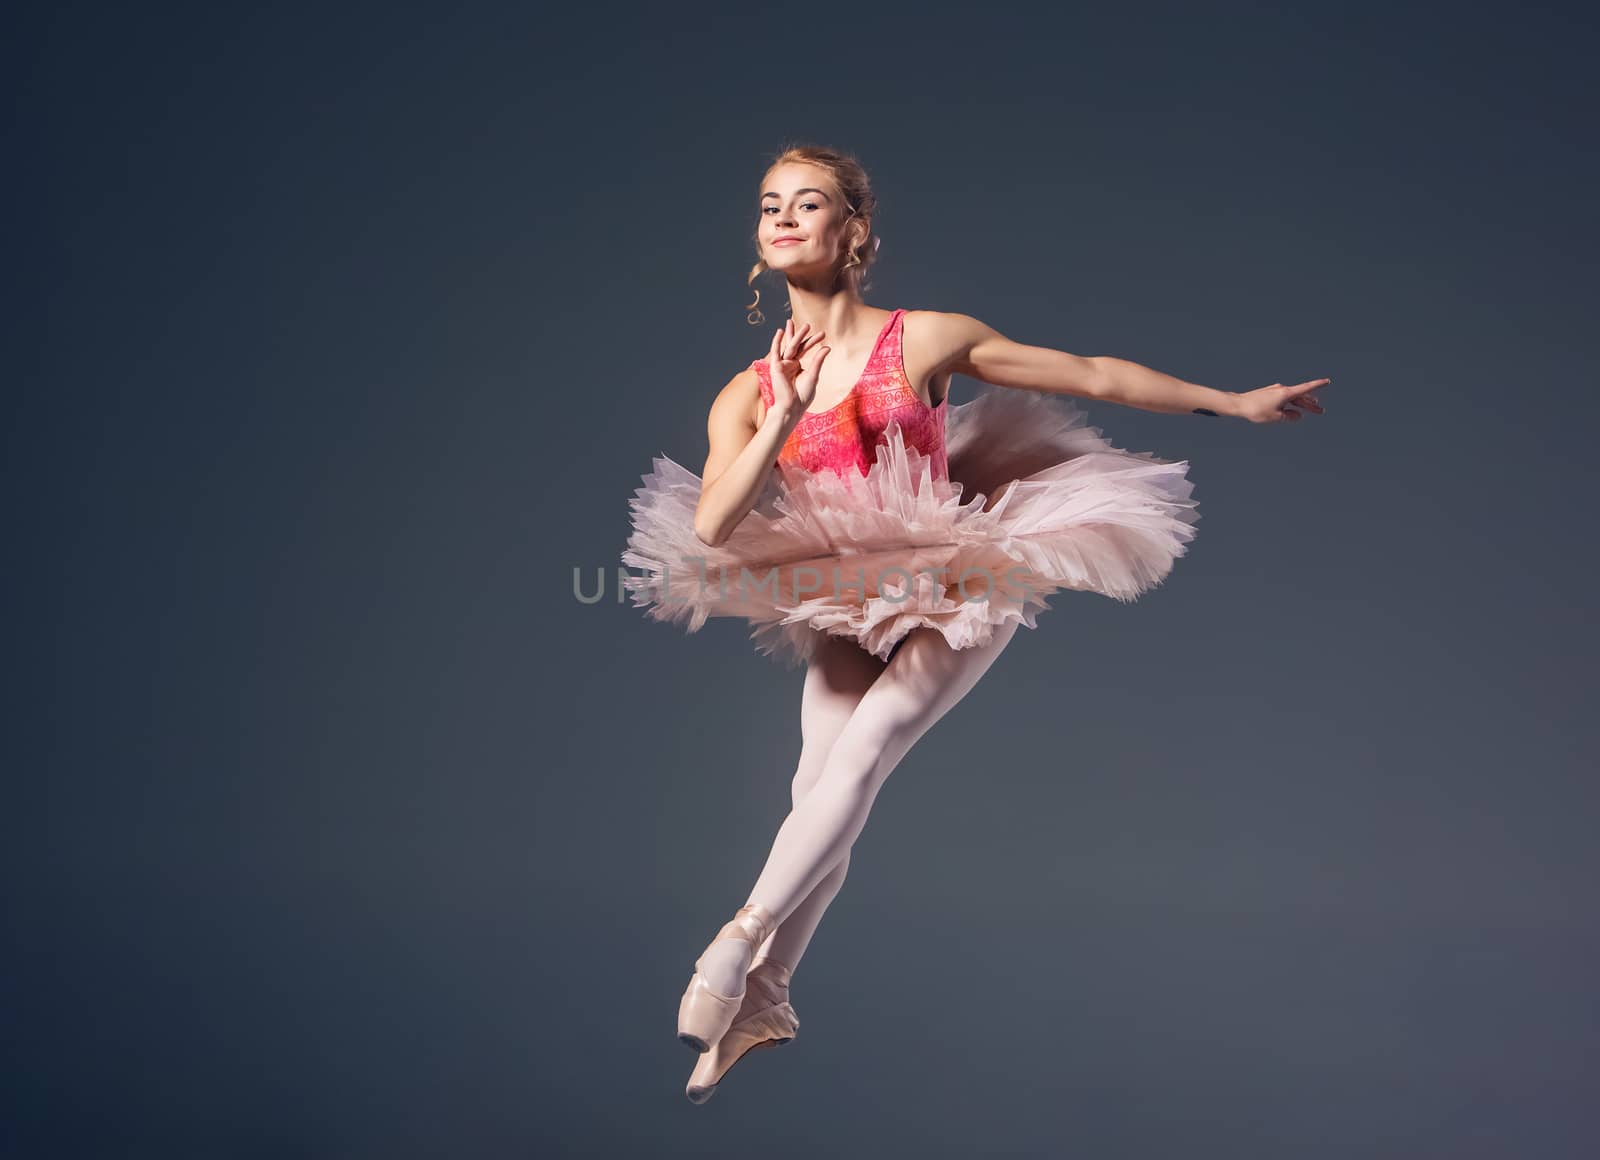 Beautiful female ballet dancer on a grey background. Ballerina is wearing  pink tutu and pointe shoes